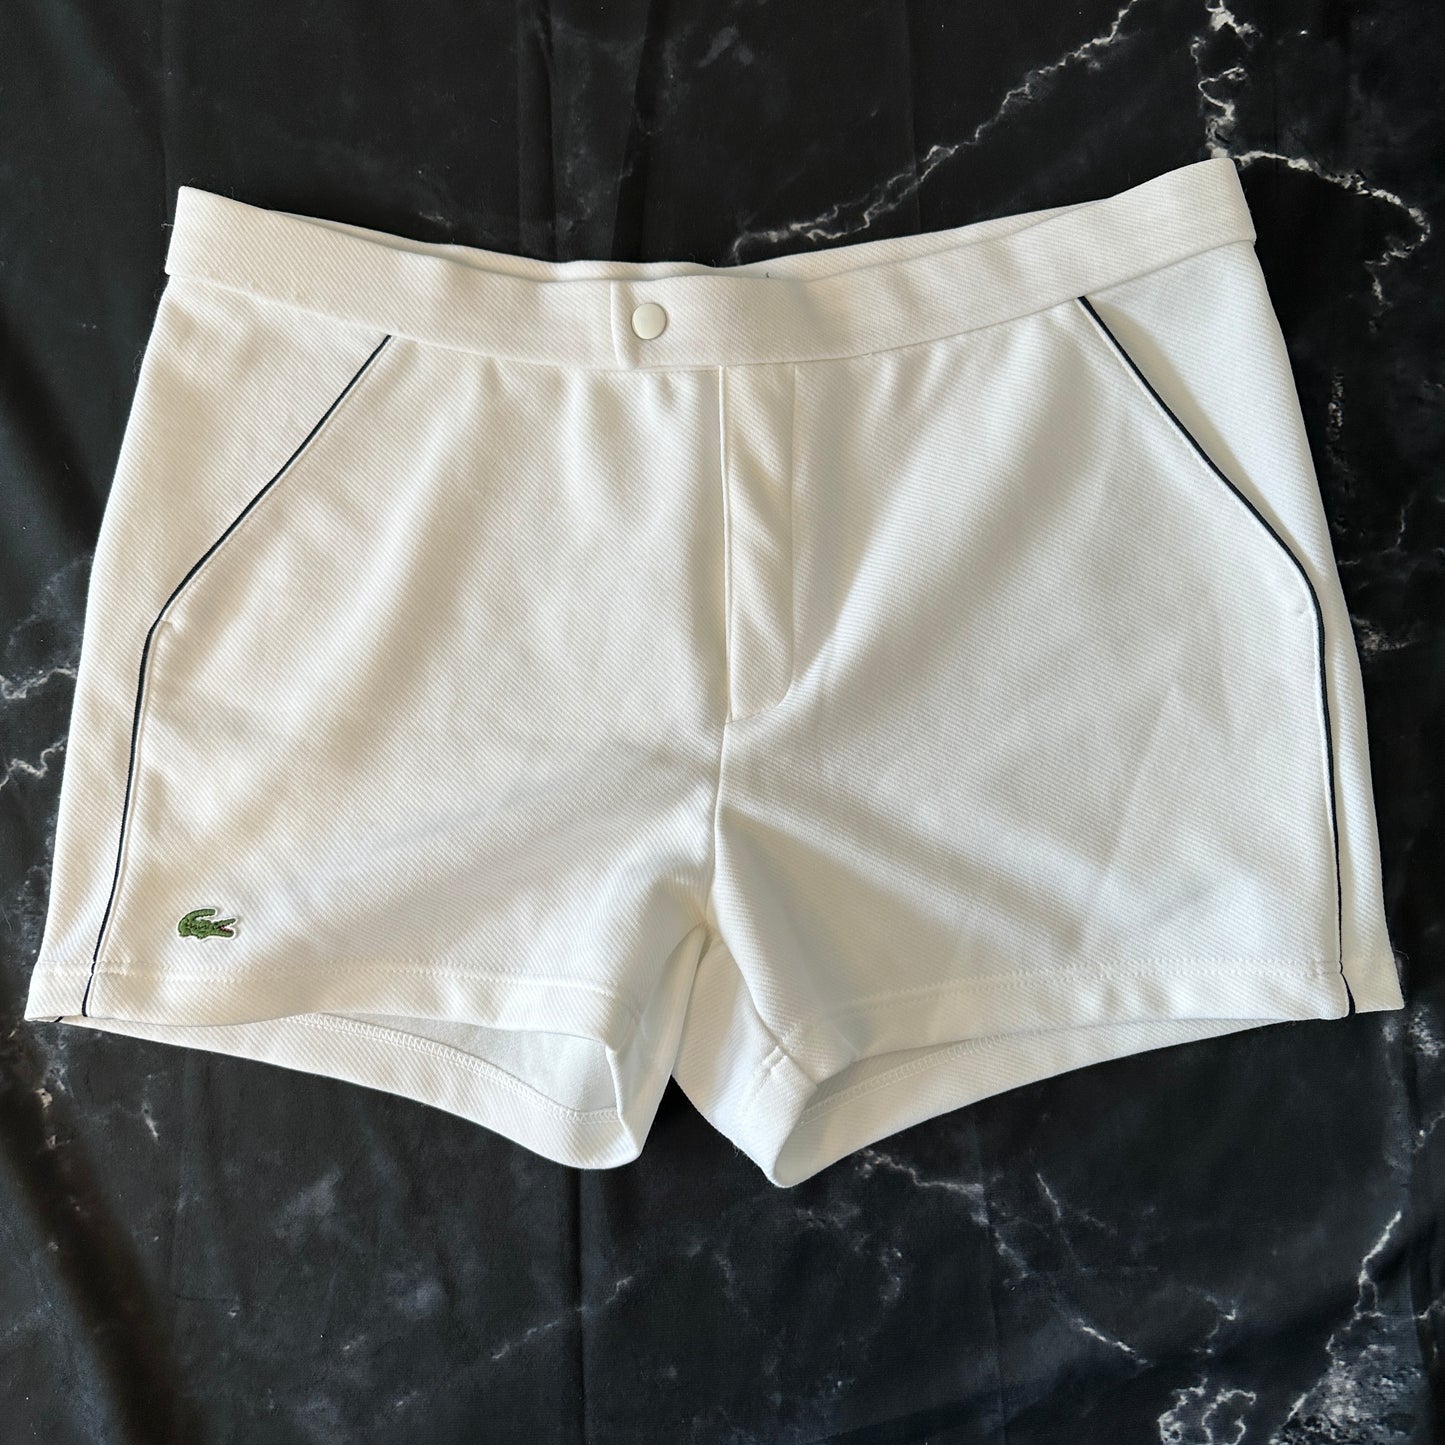 Lacoste Sport 90s Tennis Shorts - 7 - Made in France